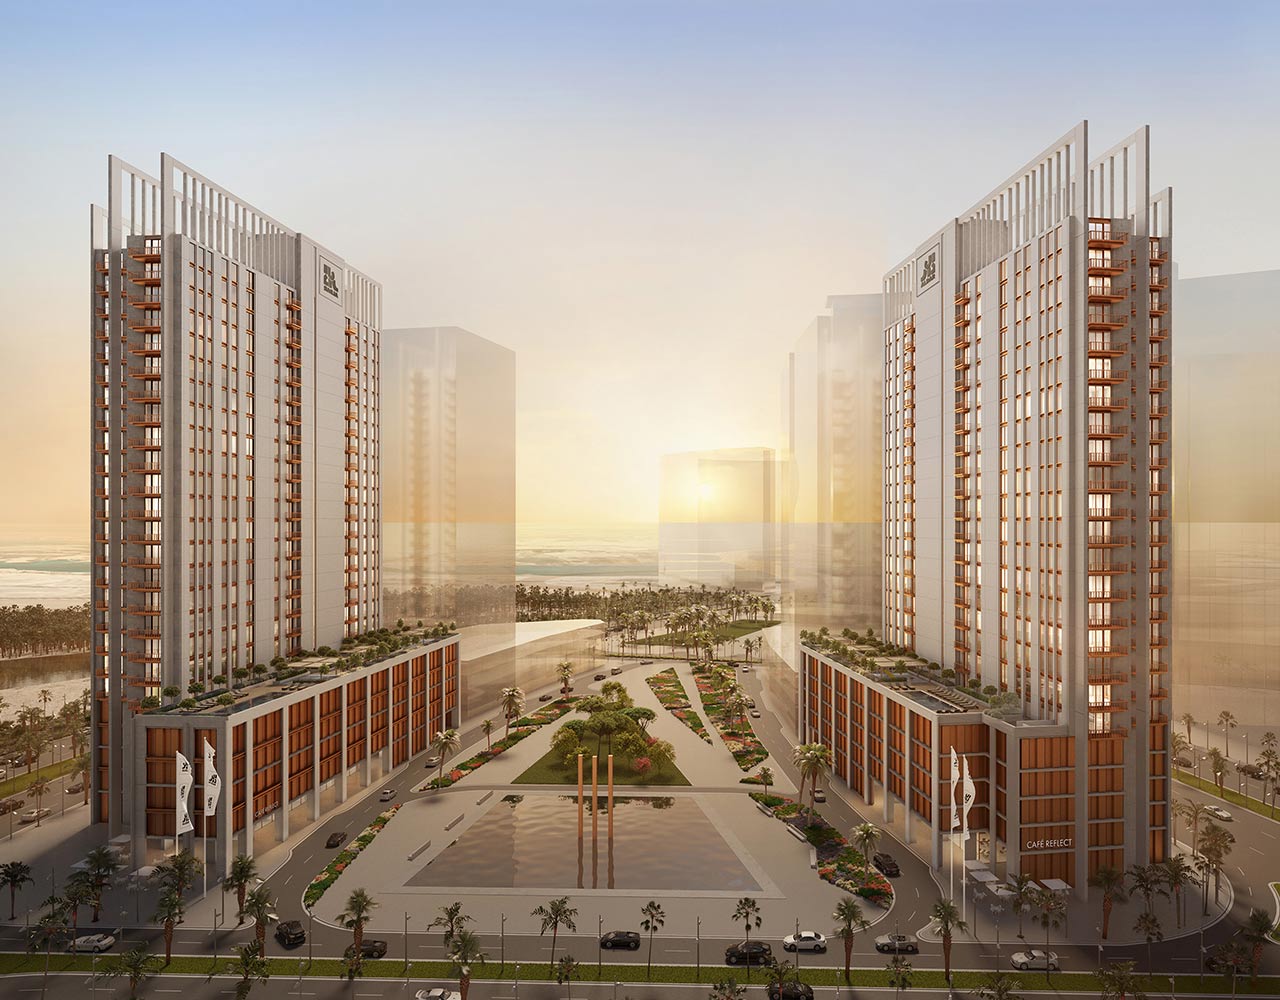 WME complete design for Aldar’s Boutique Residential development “Reflection”, Abu Dhabi